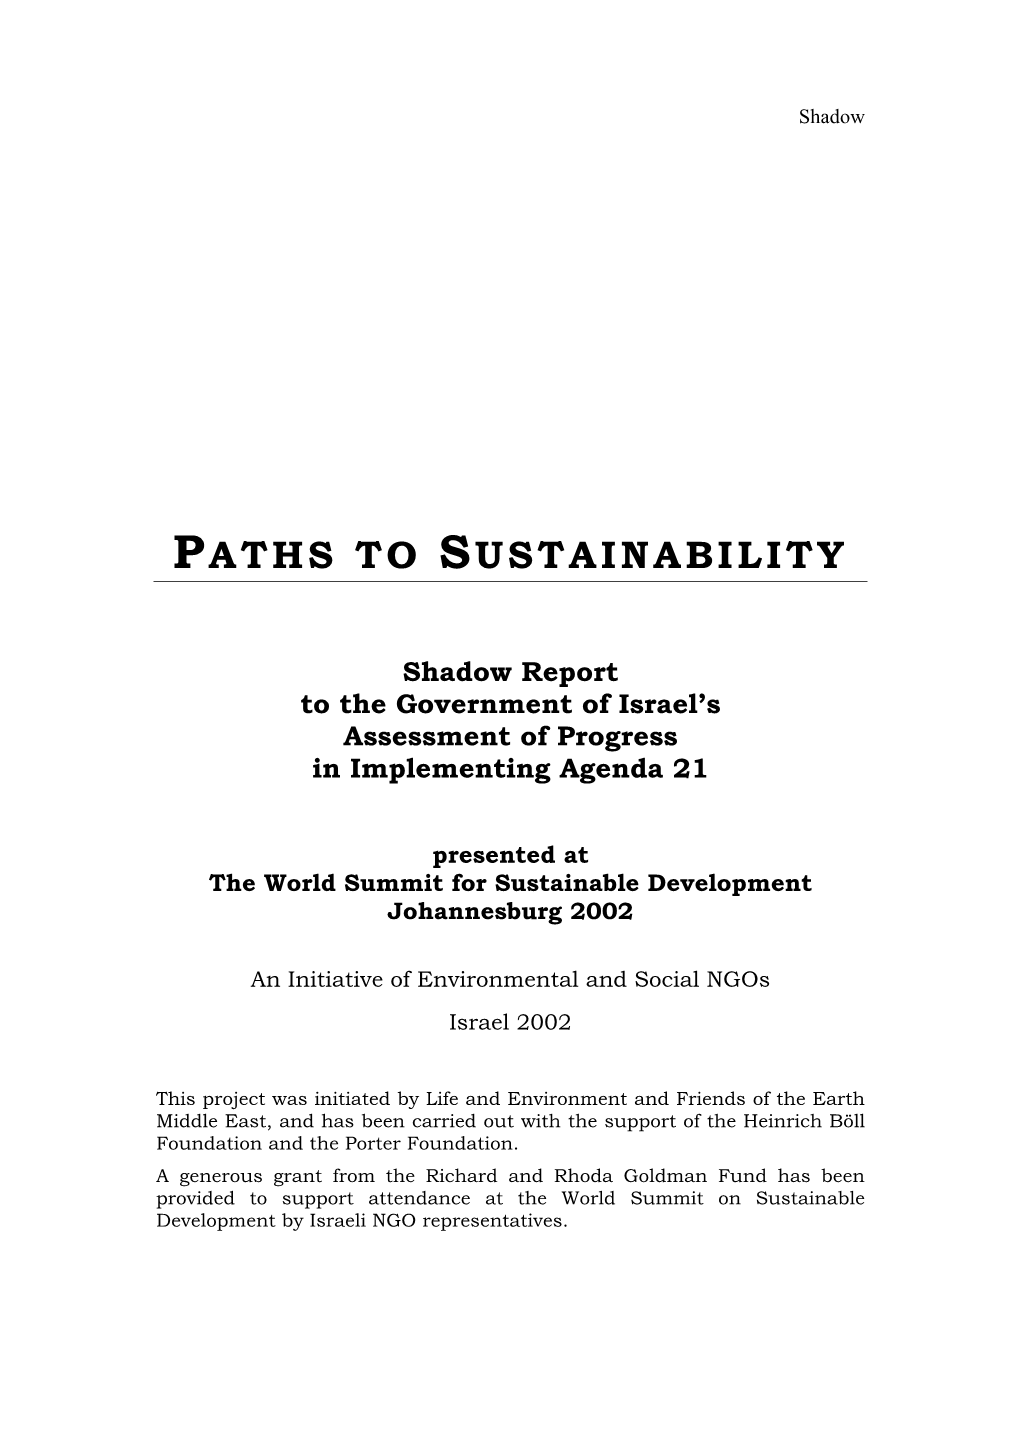 Paths to Sustainability